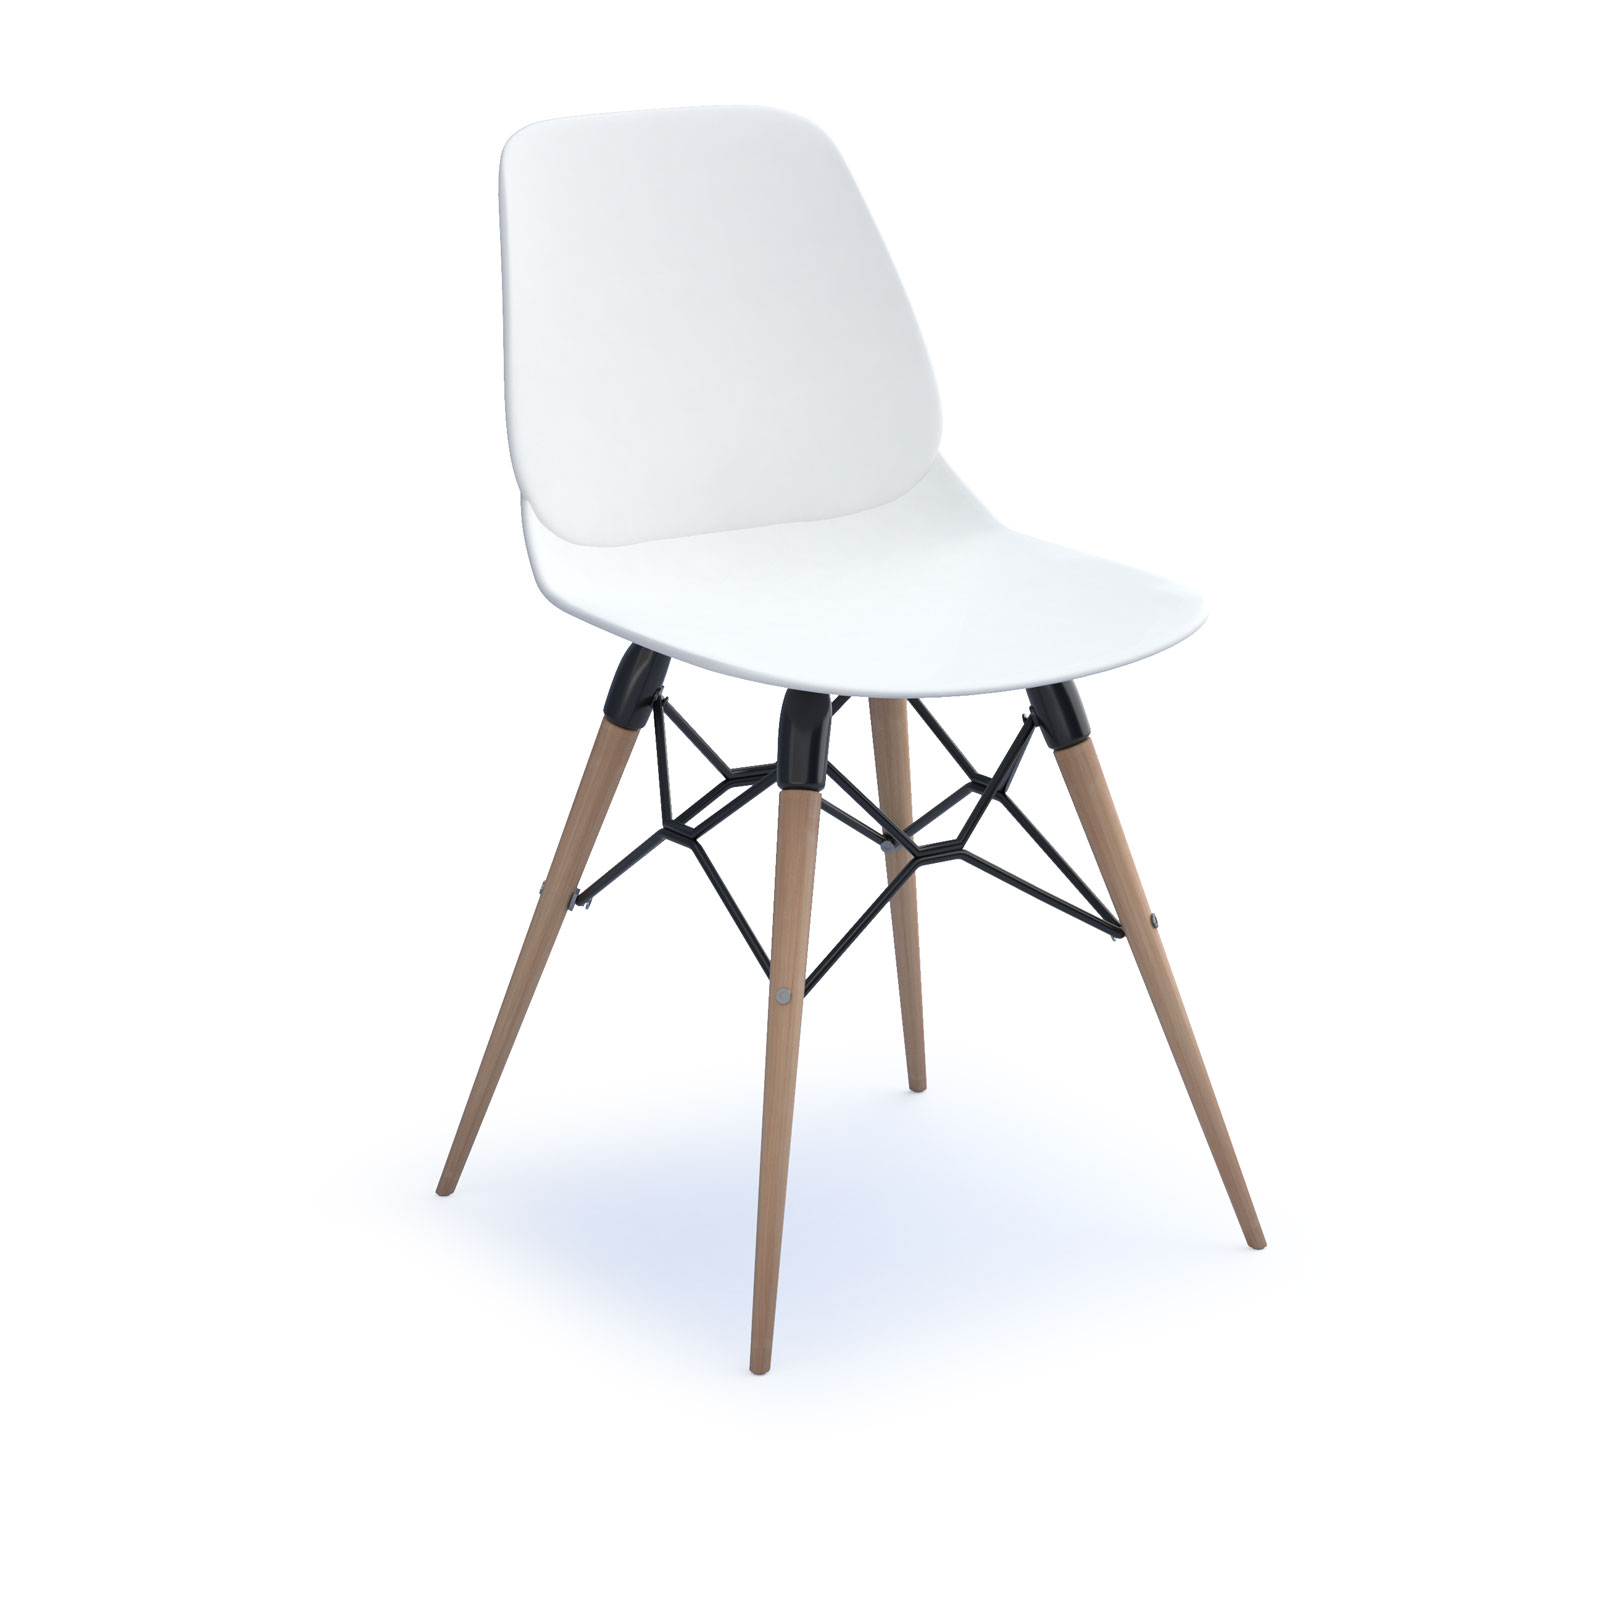 Strut multi-purpose chair with natural oak frame